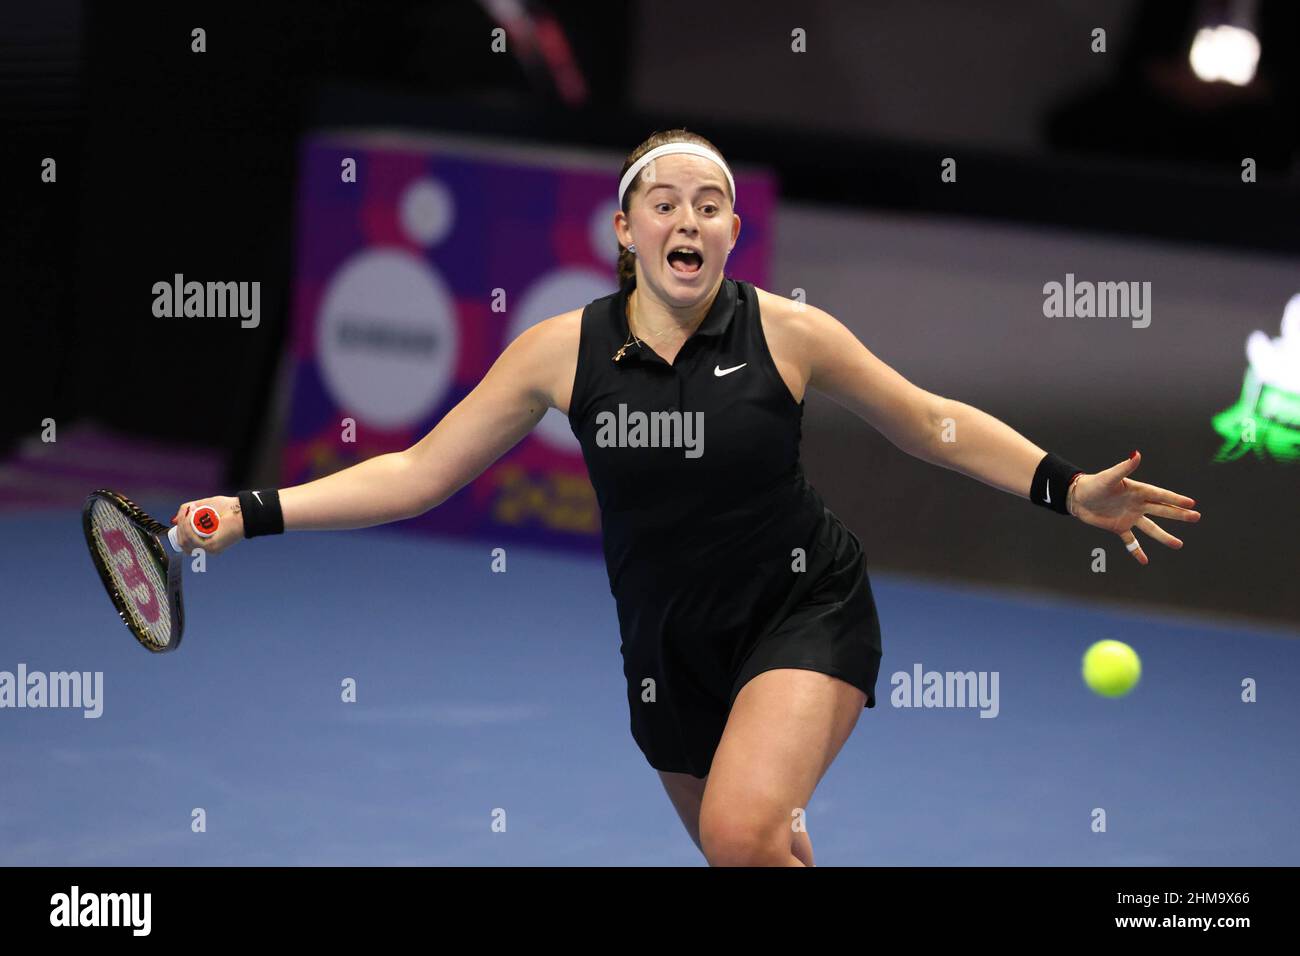 Saint Petersburg, Russia. 08th Feb, 2022. Jelena Ostapenko of Latvia playing against Xinyu Wang of China during the St.Petersburg Ladies Trophy 2022 tennis tournament. Final score: (Jelena Ostapenko 2-0 Xinyu Wang). Credit: SOPA Images Limited/Alamy Live News Stock Photo